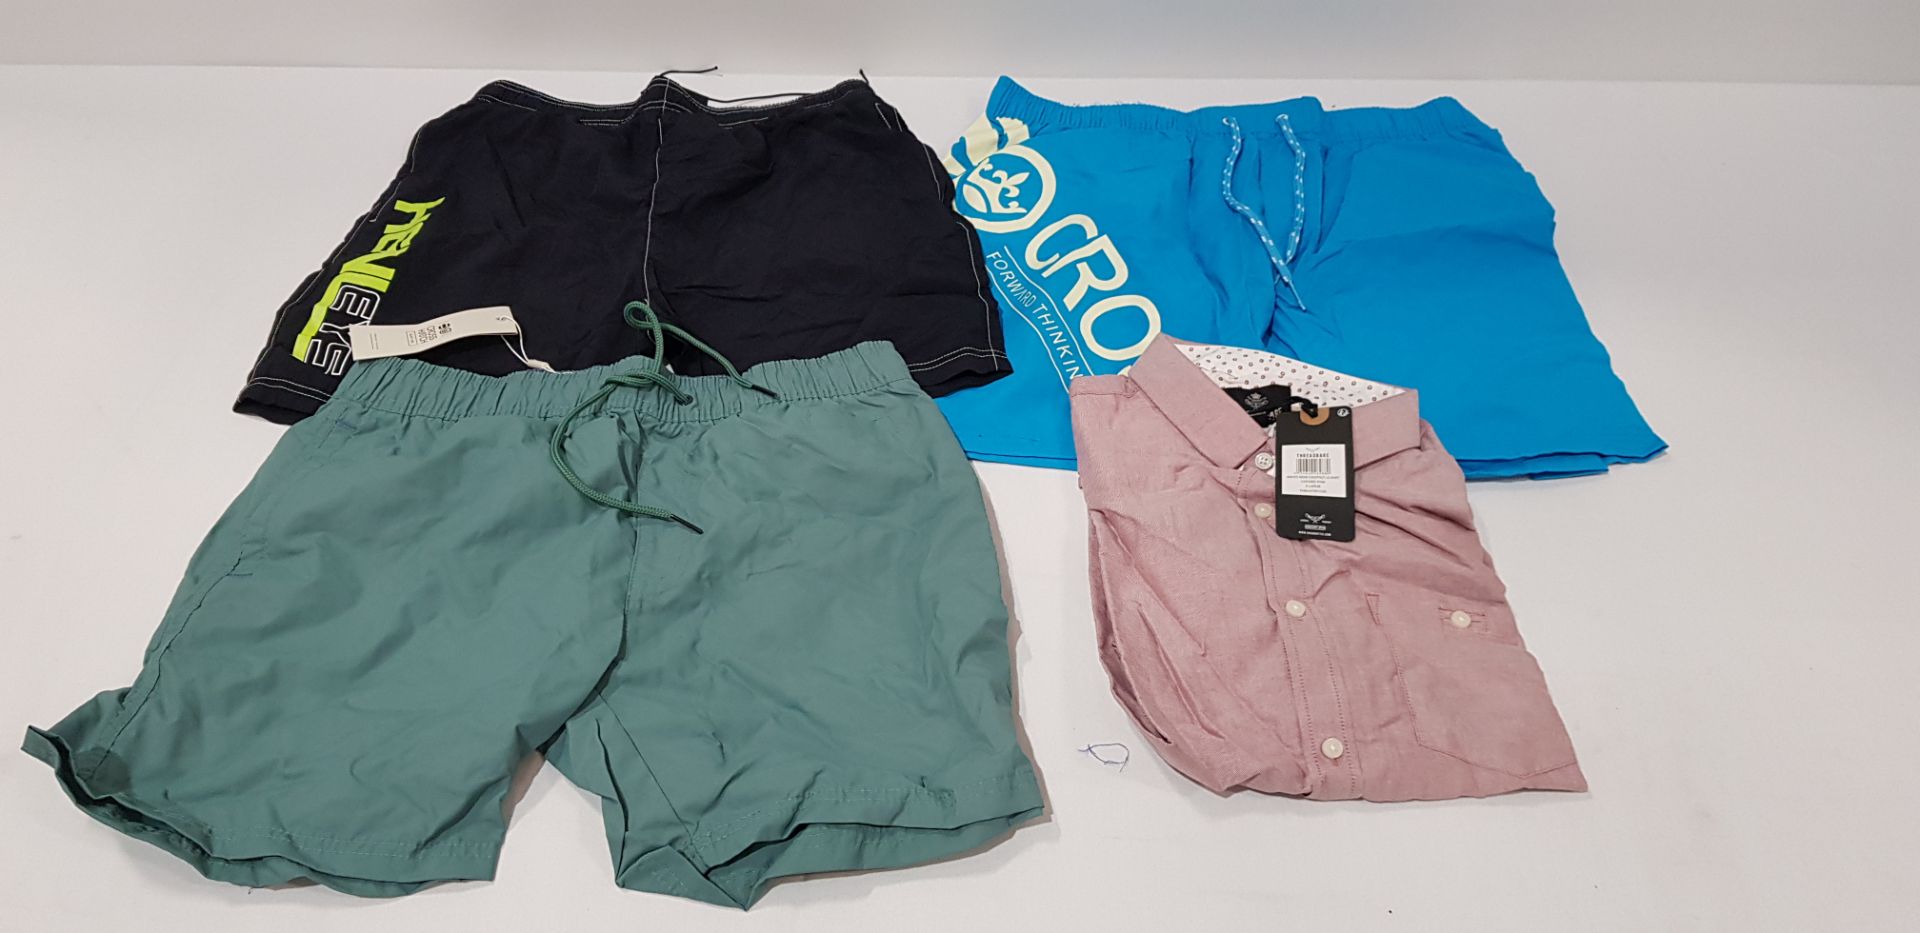 20 X BRAND NEW MIXED LOT CONTAINING 10 MIXED MENS CROSSHATCH AND HENLEYS SWIMMING SHORTS IN MIXED